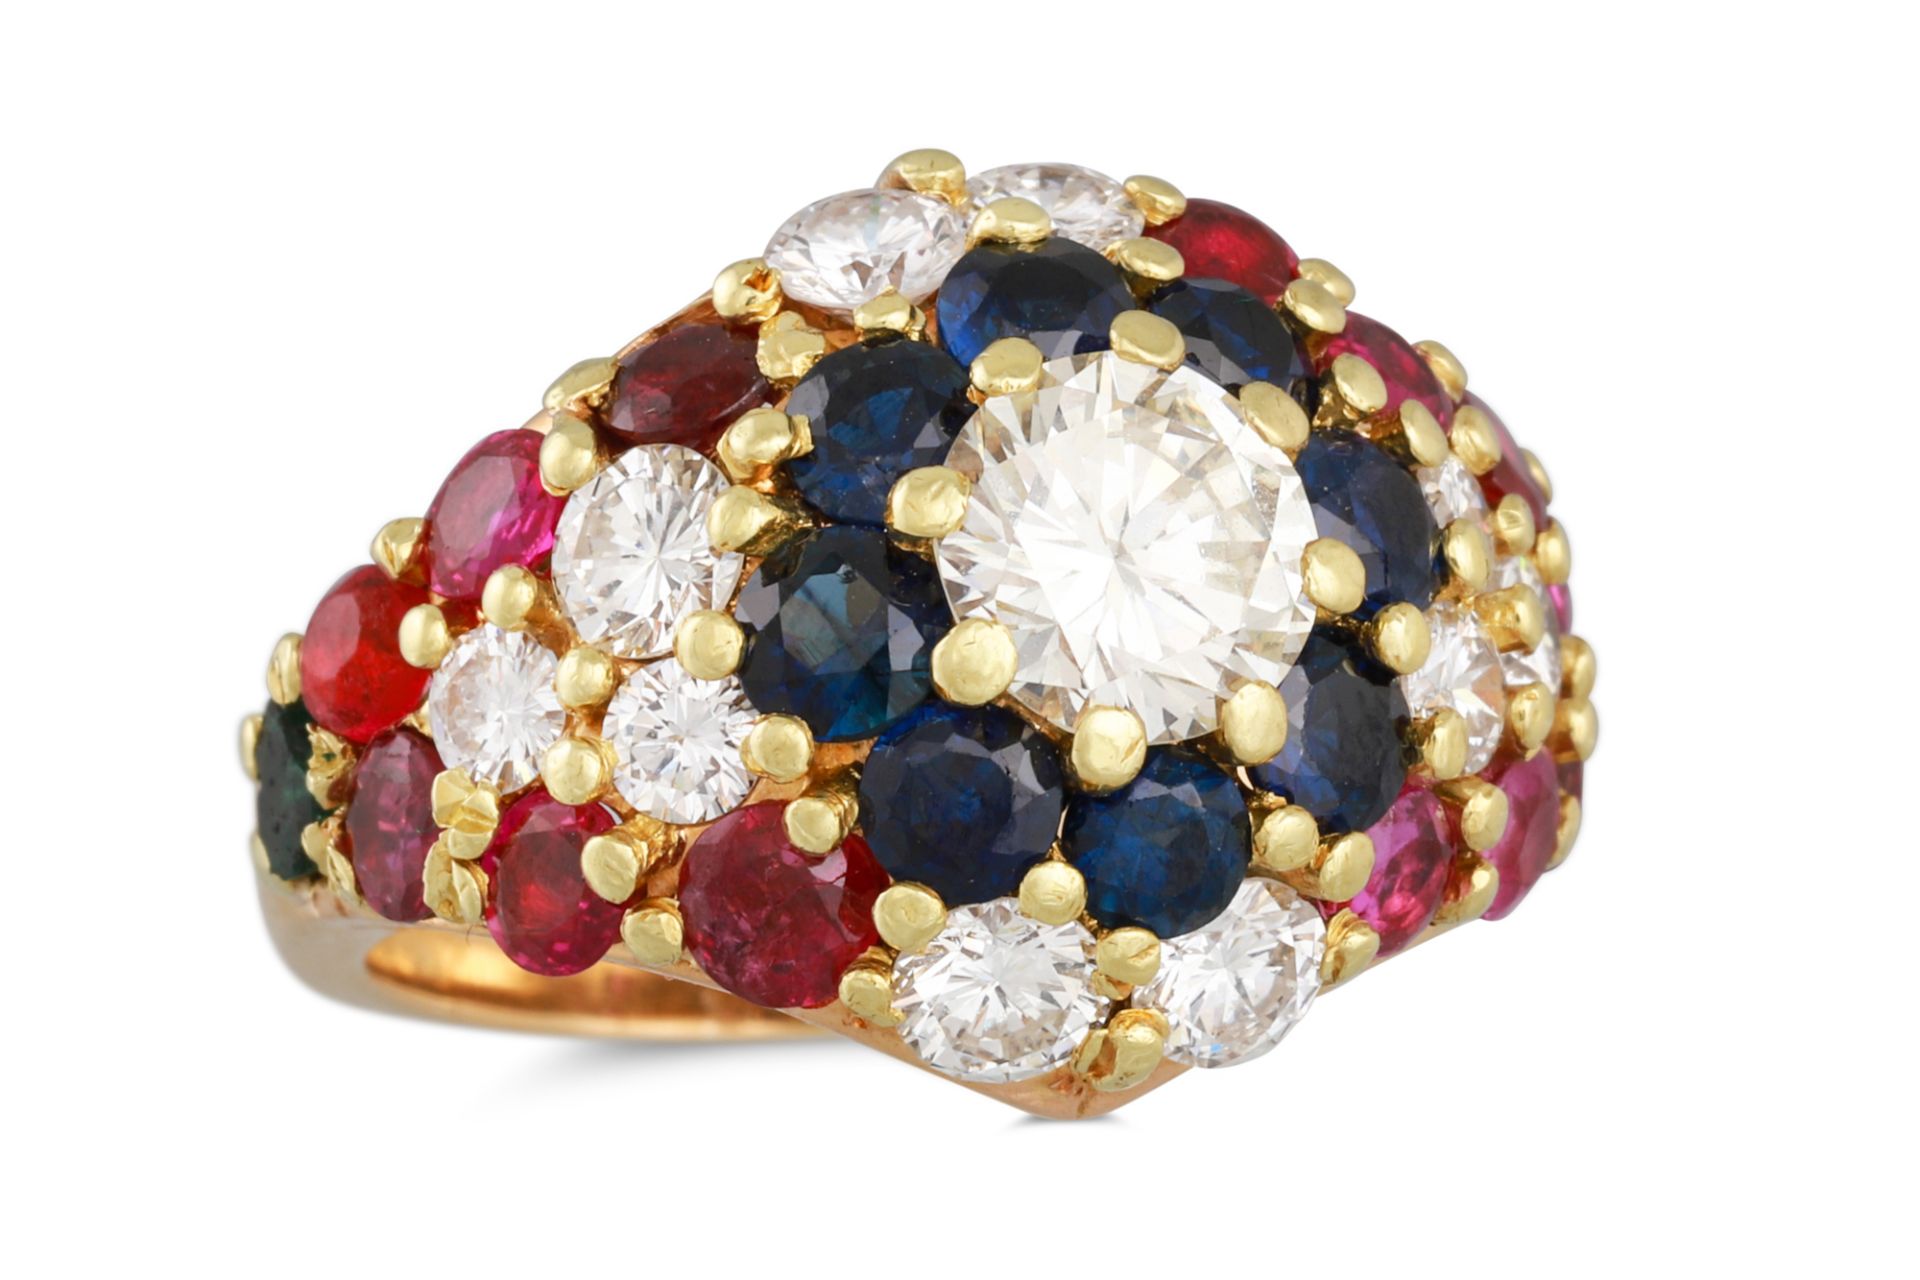 A DIAMOND AND COLOURED GEM-STONE CLUSTER RING, bombé style, in 18ct yellow gold. Estimated: weight